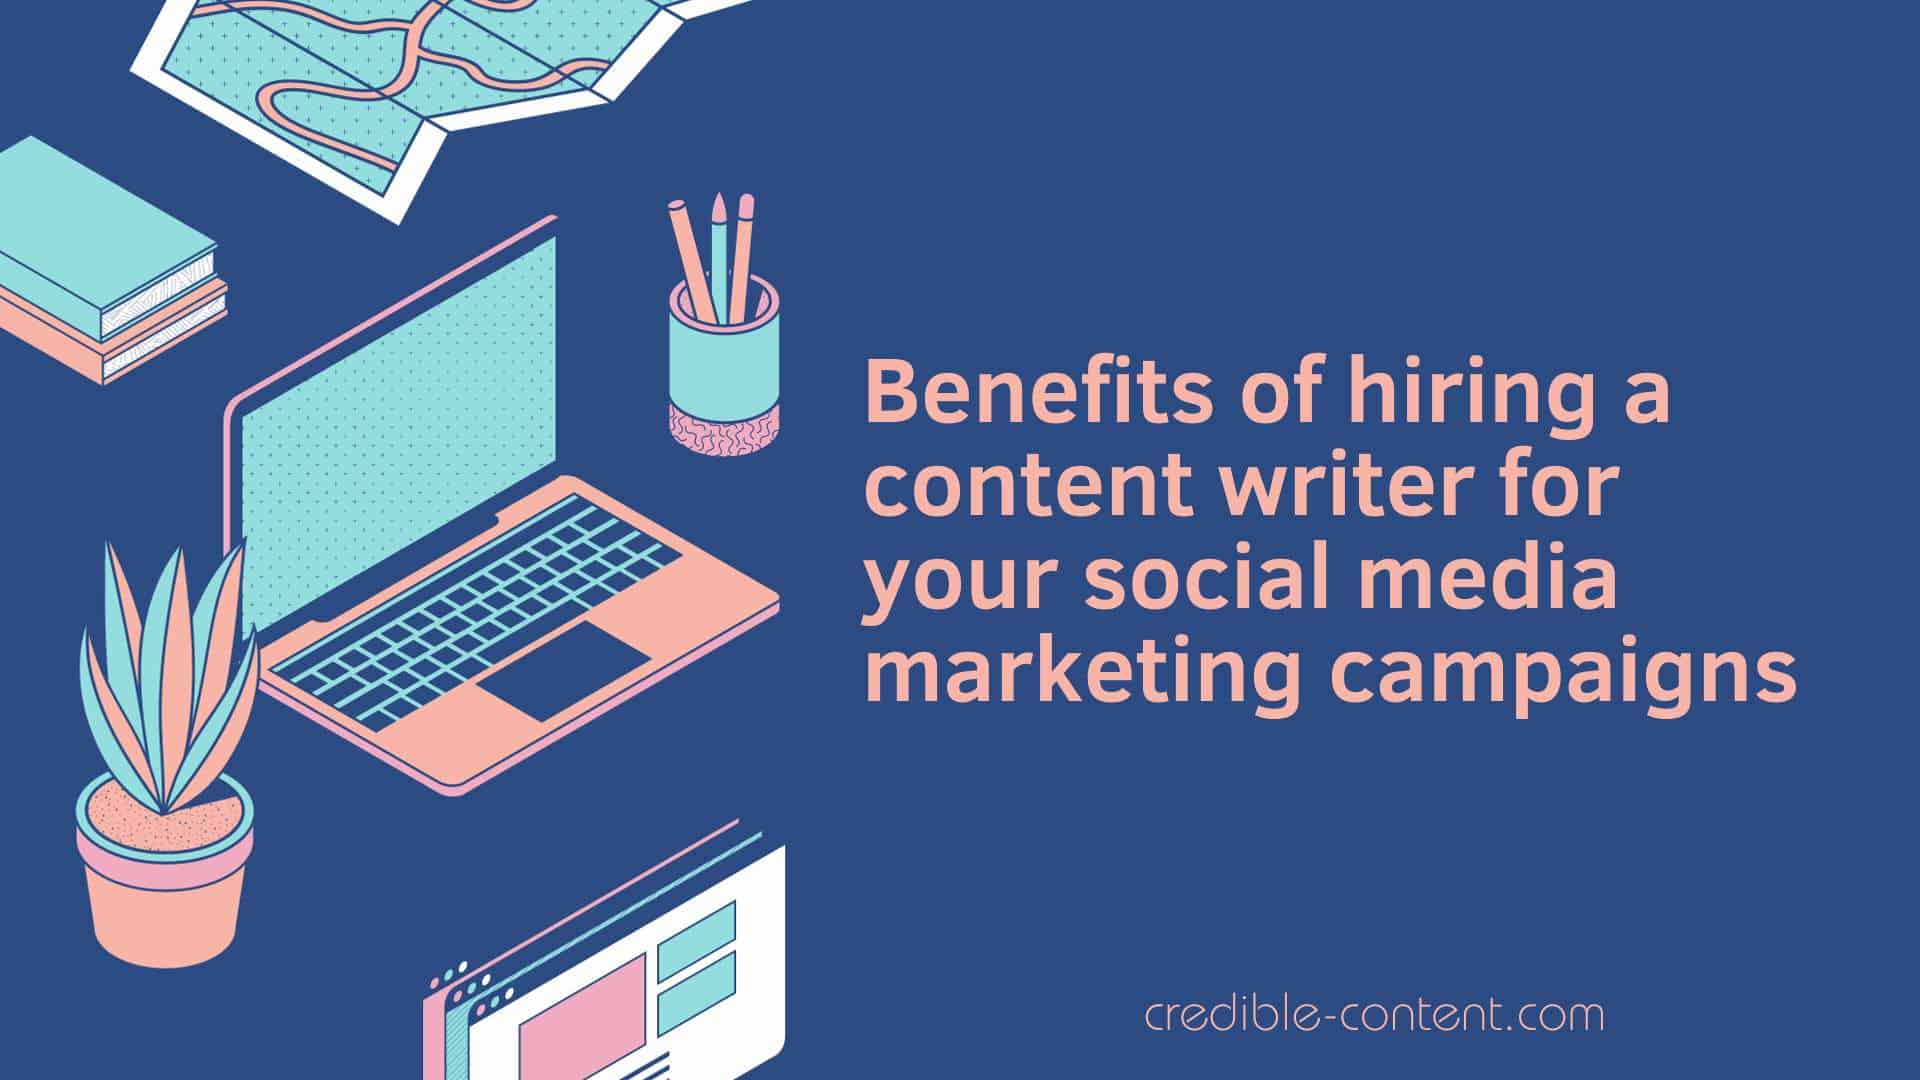 Benefits of hiring a content writer for your social media marketing campaigns